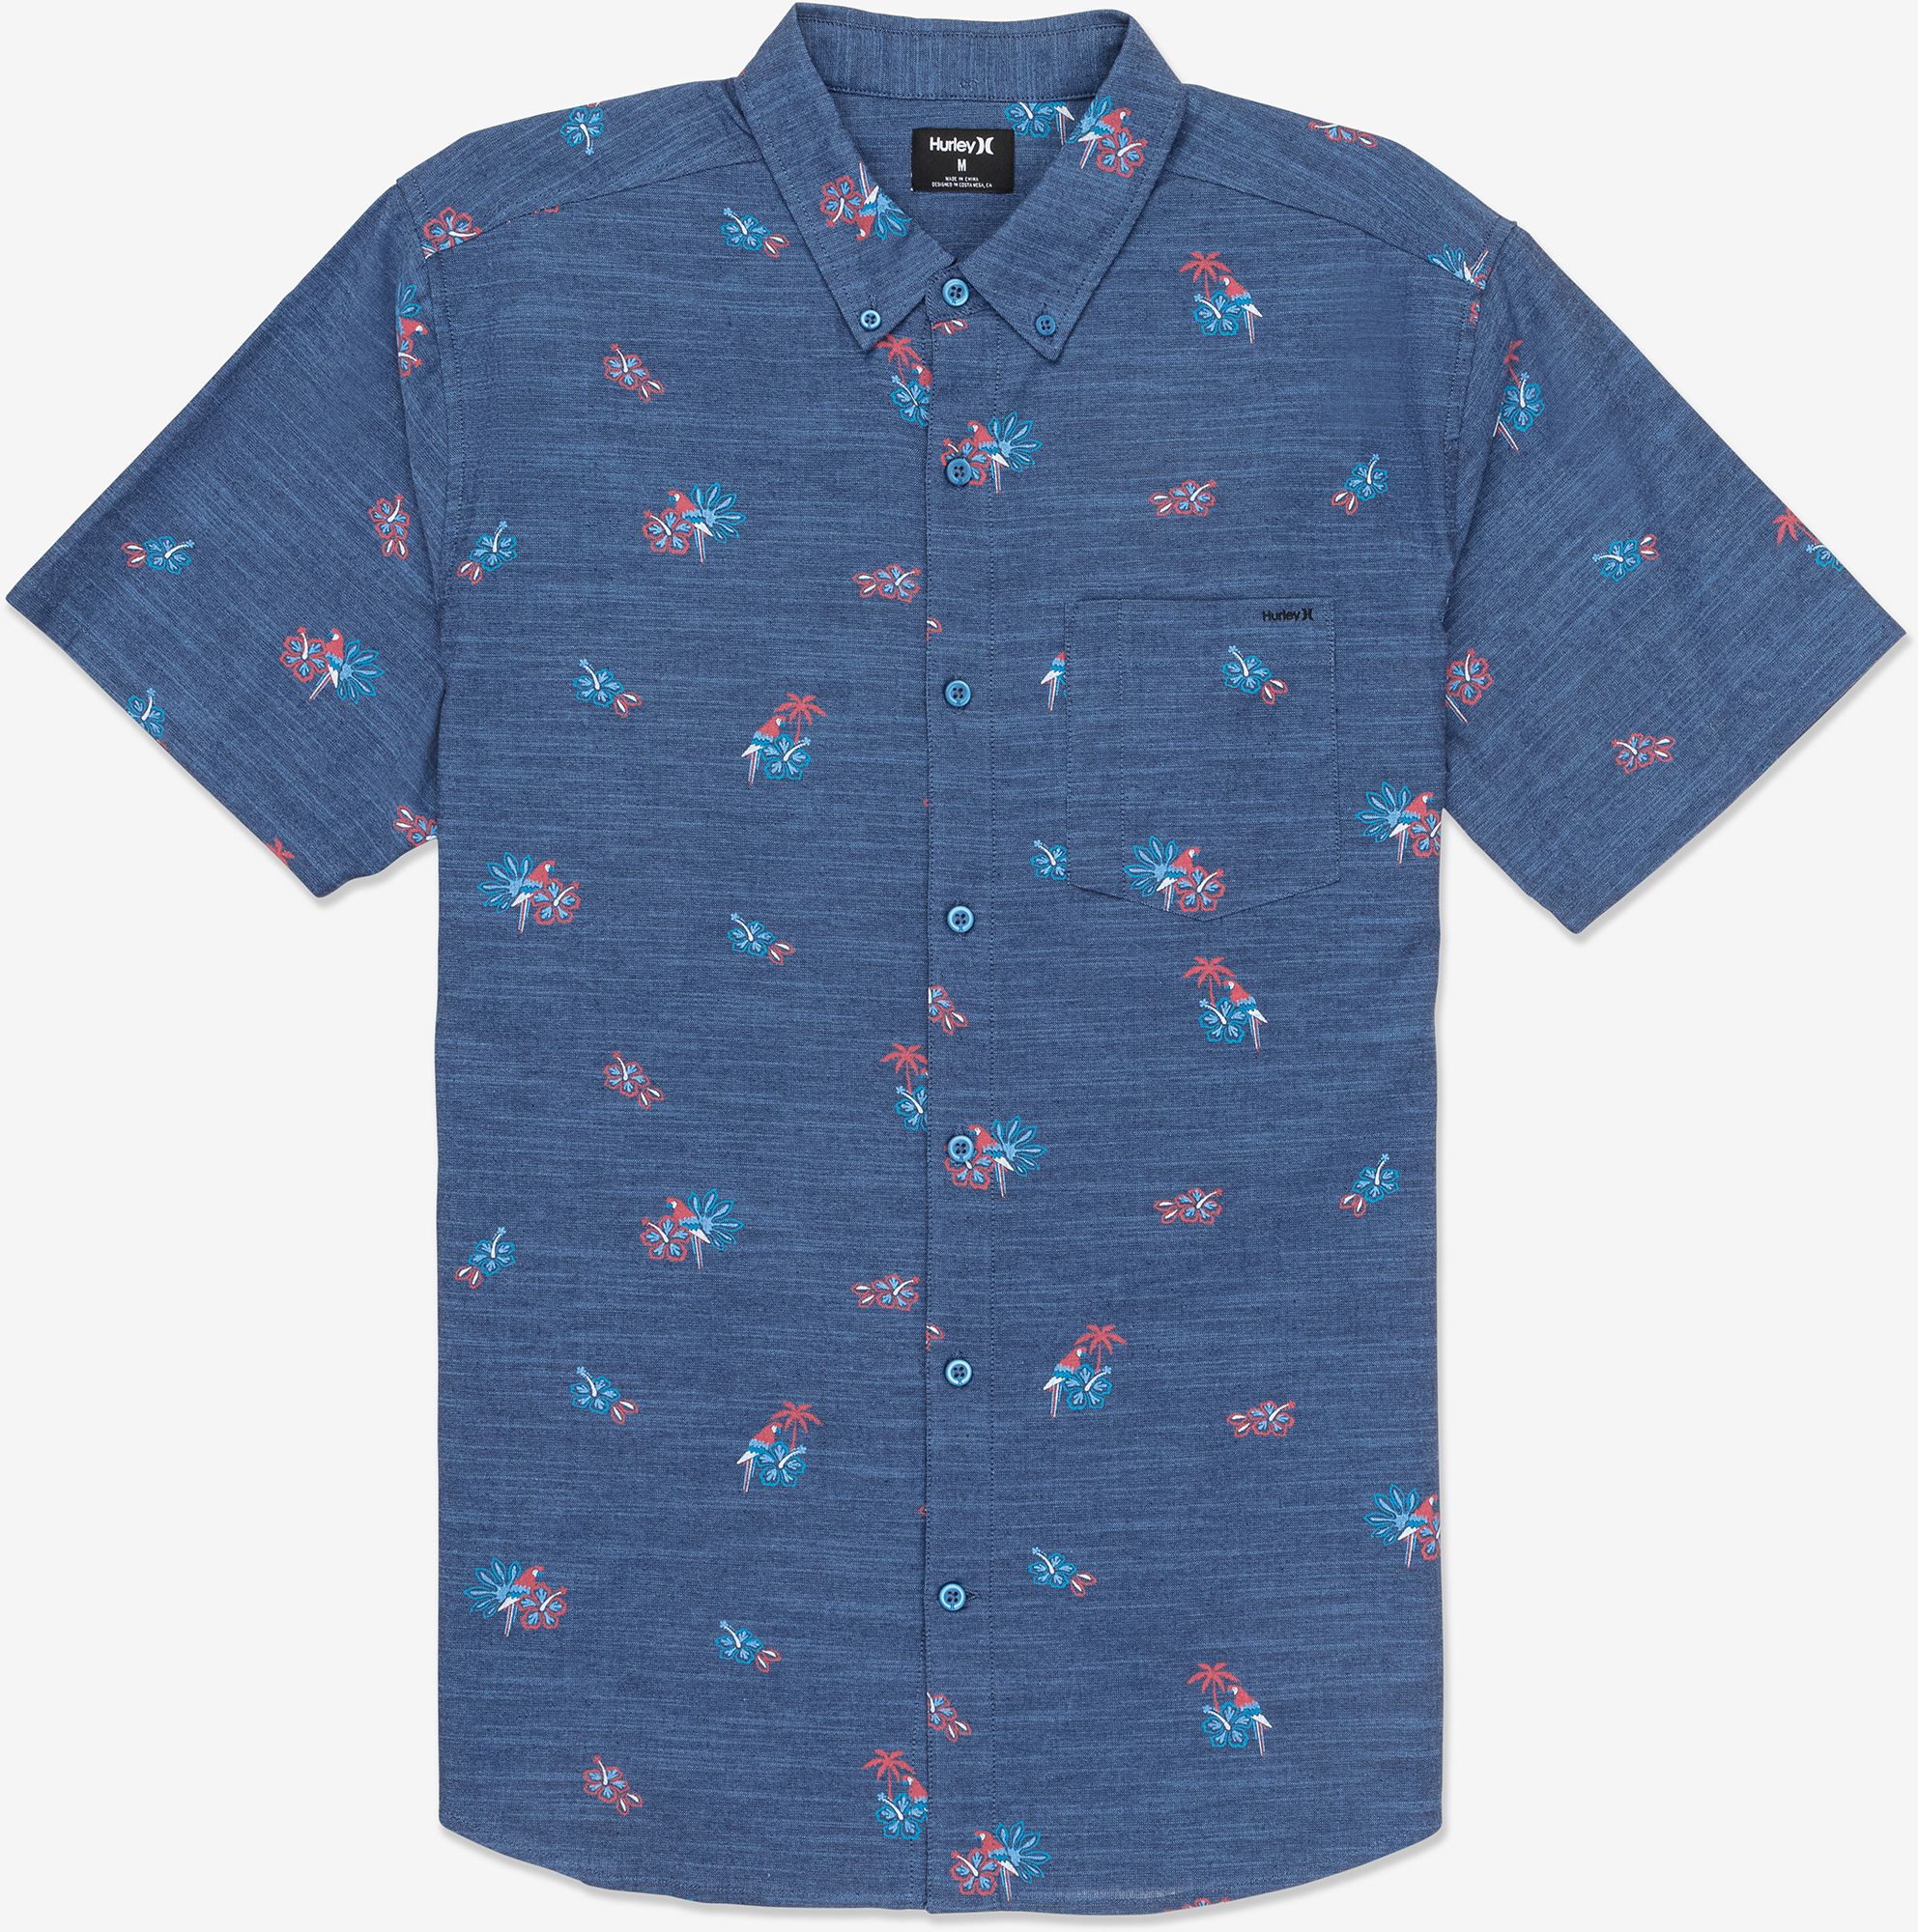 Hurley Men's One and Only Stretch Print Short Sleeve Shirt